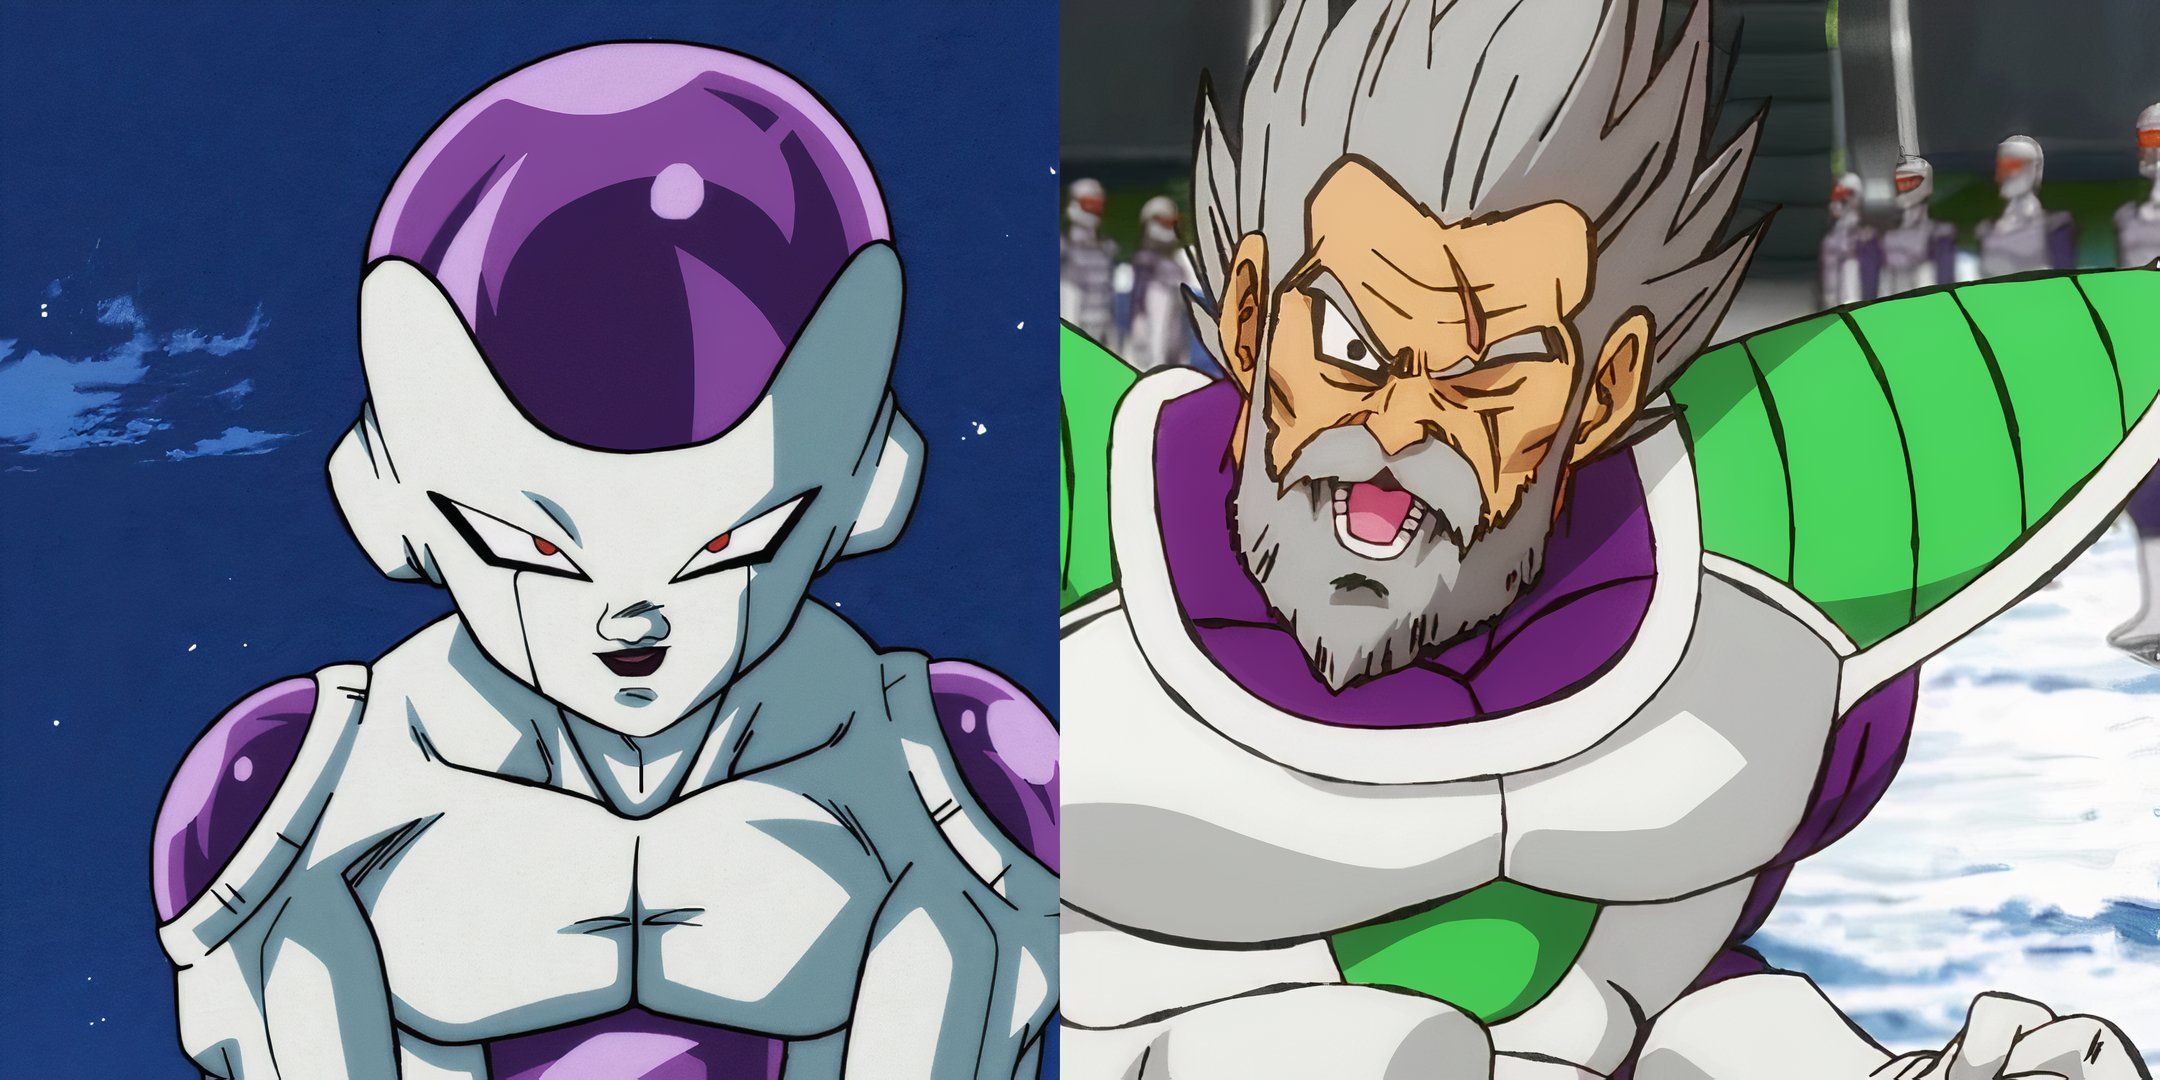 Dragon Ball X Characters Who Hate Vegeta The Most